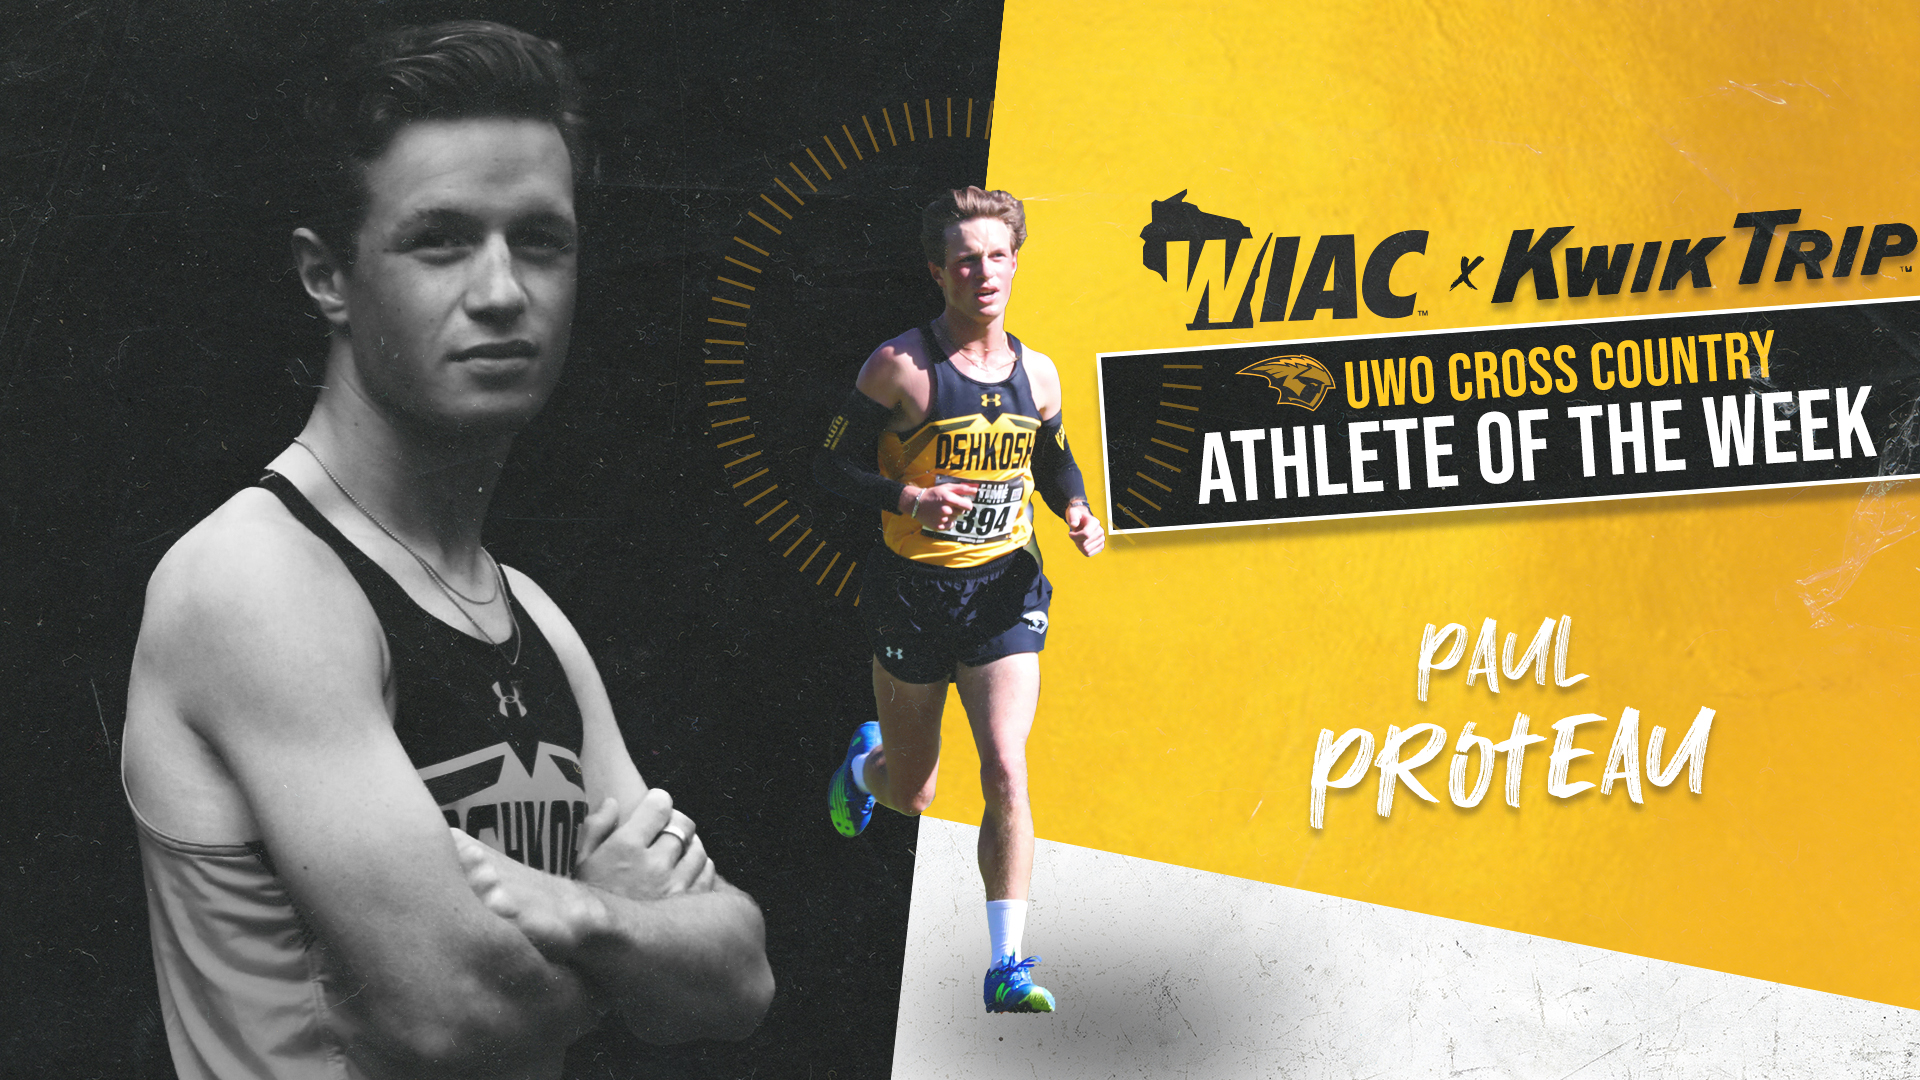 Proteau Earns WIAC Athlete of the Week Honors